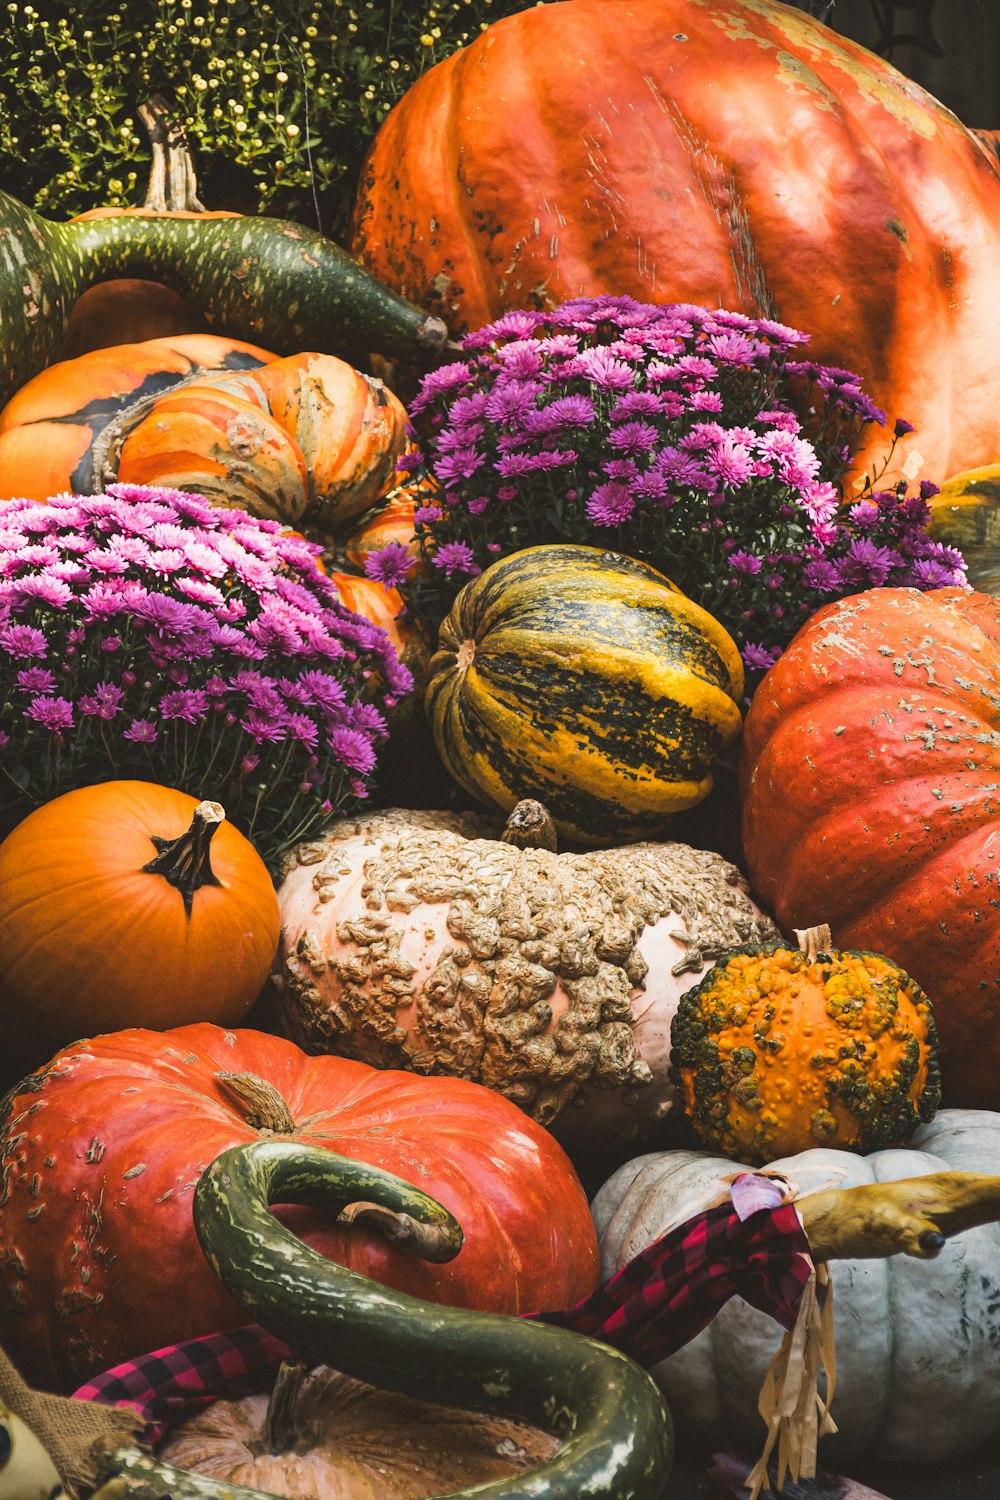 a pile of pumpkins and gourds with purple flowers